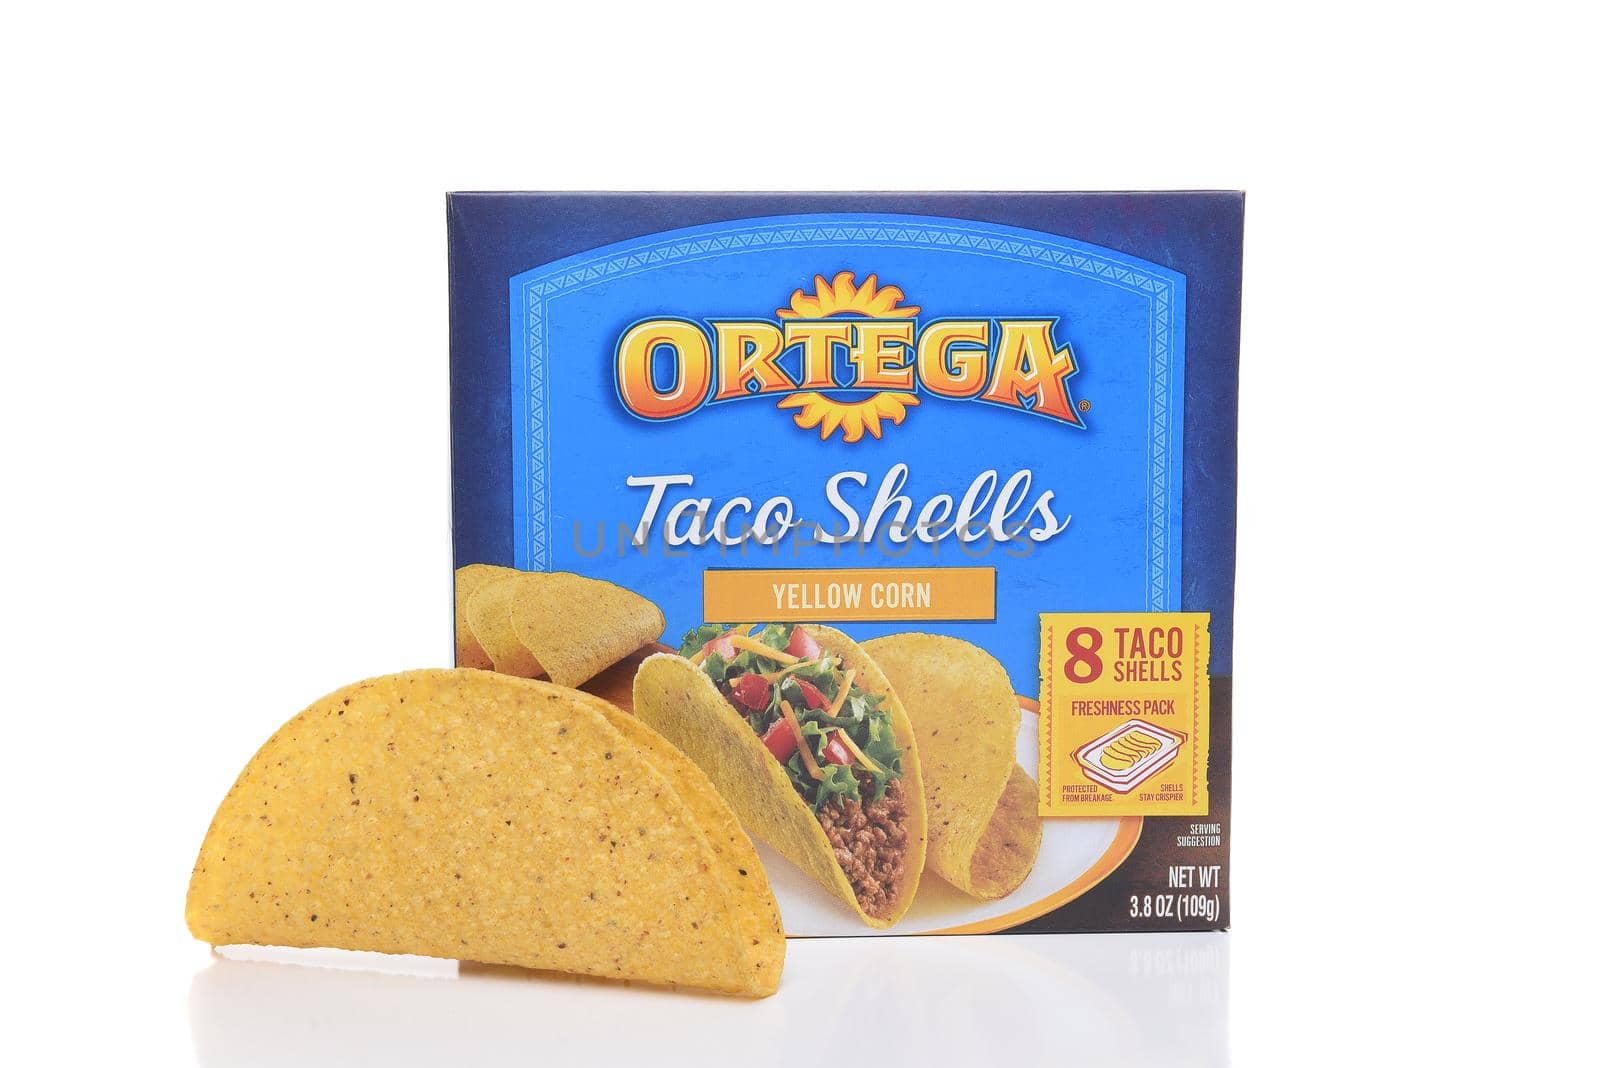 IRVINE, CALIFORNIA - AUGUST 21, 2017:  Ortega Taco Shells. Ortega makes a complete line of Mexican cuisine products.